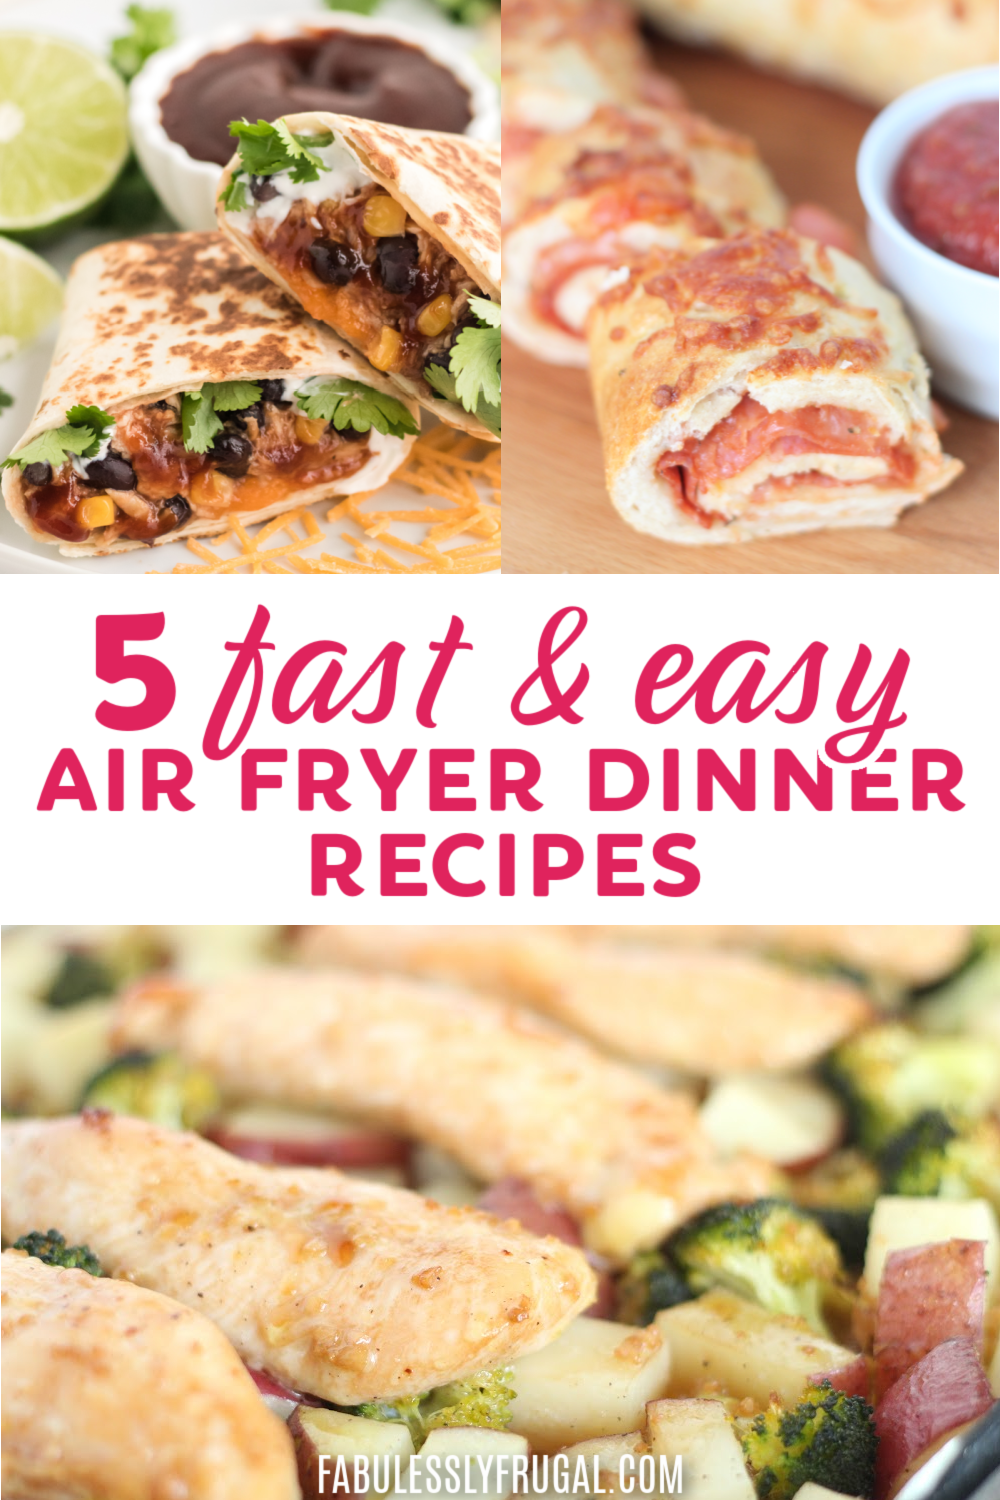 Simple 5 Dollar Air Fryer Dinners Recipe - Fabulessly Frugal